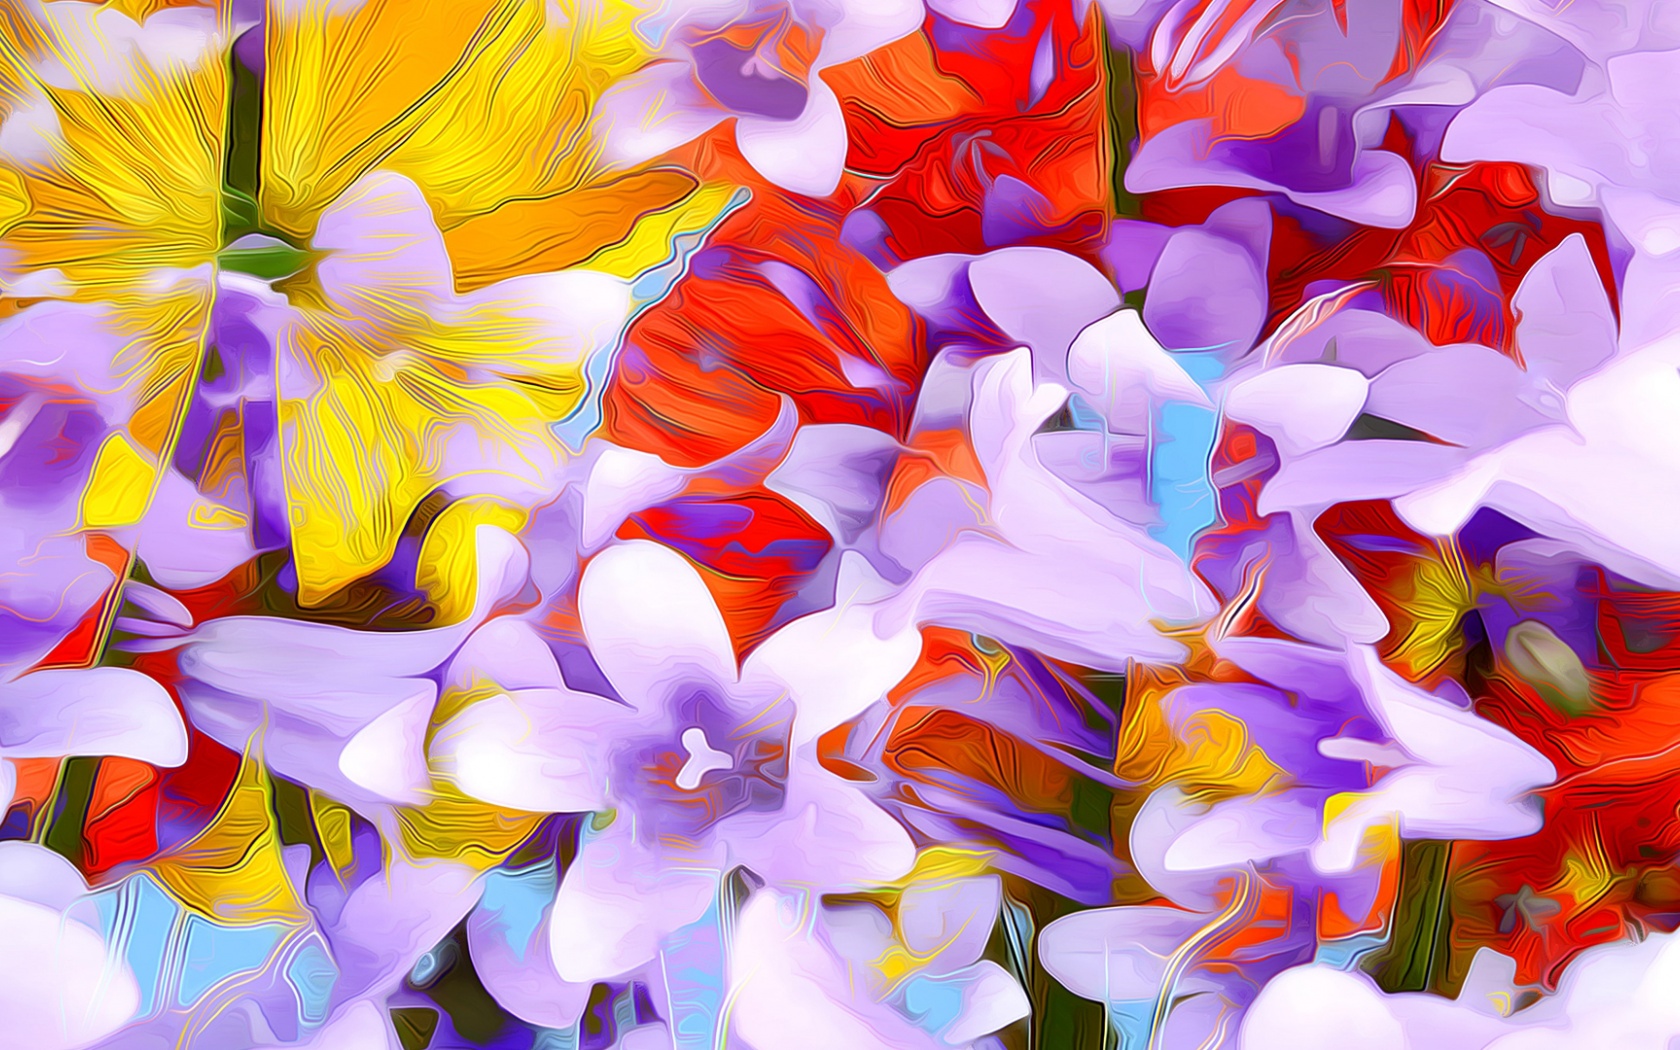 Flowers Art Abstraction (click to view) HD Wallpapers in 1680x1050 Resolution